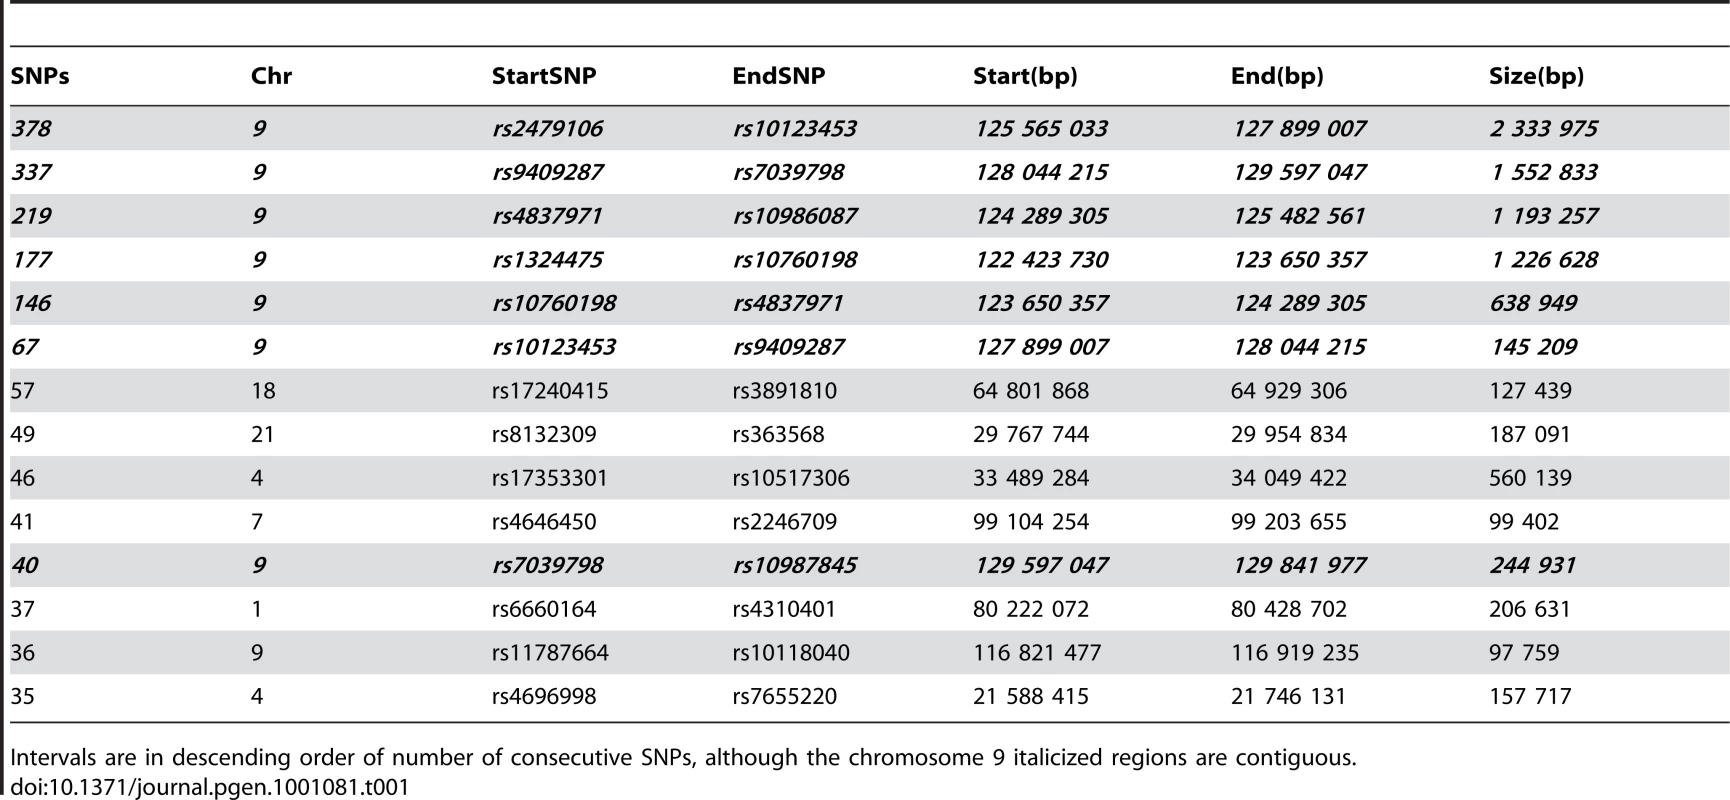 All intervals of 35 or more consecutive SNPs homozygous and identical by state among the six affected CMT samples.